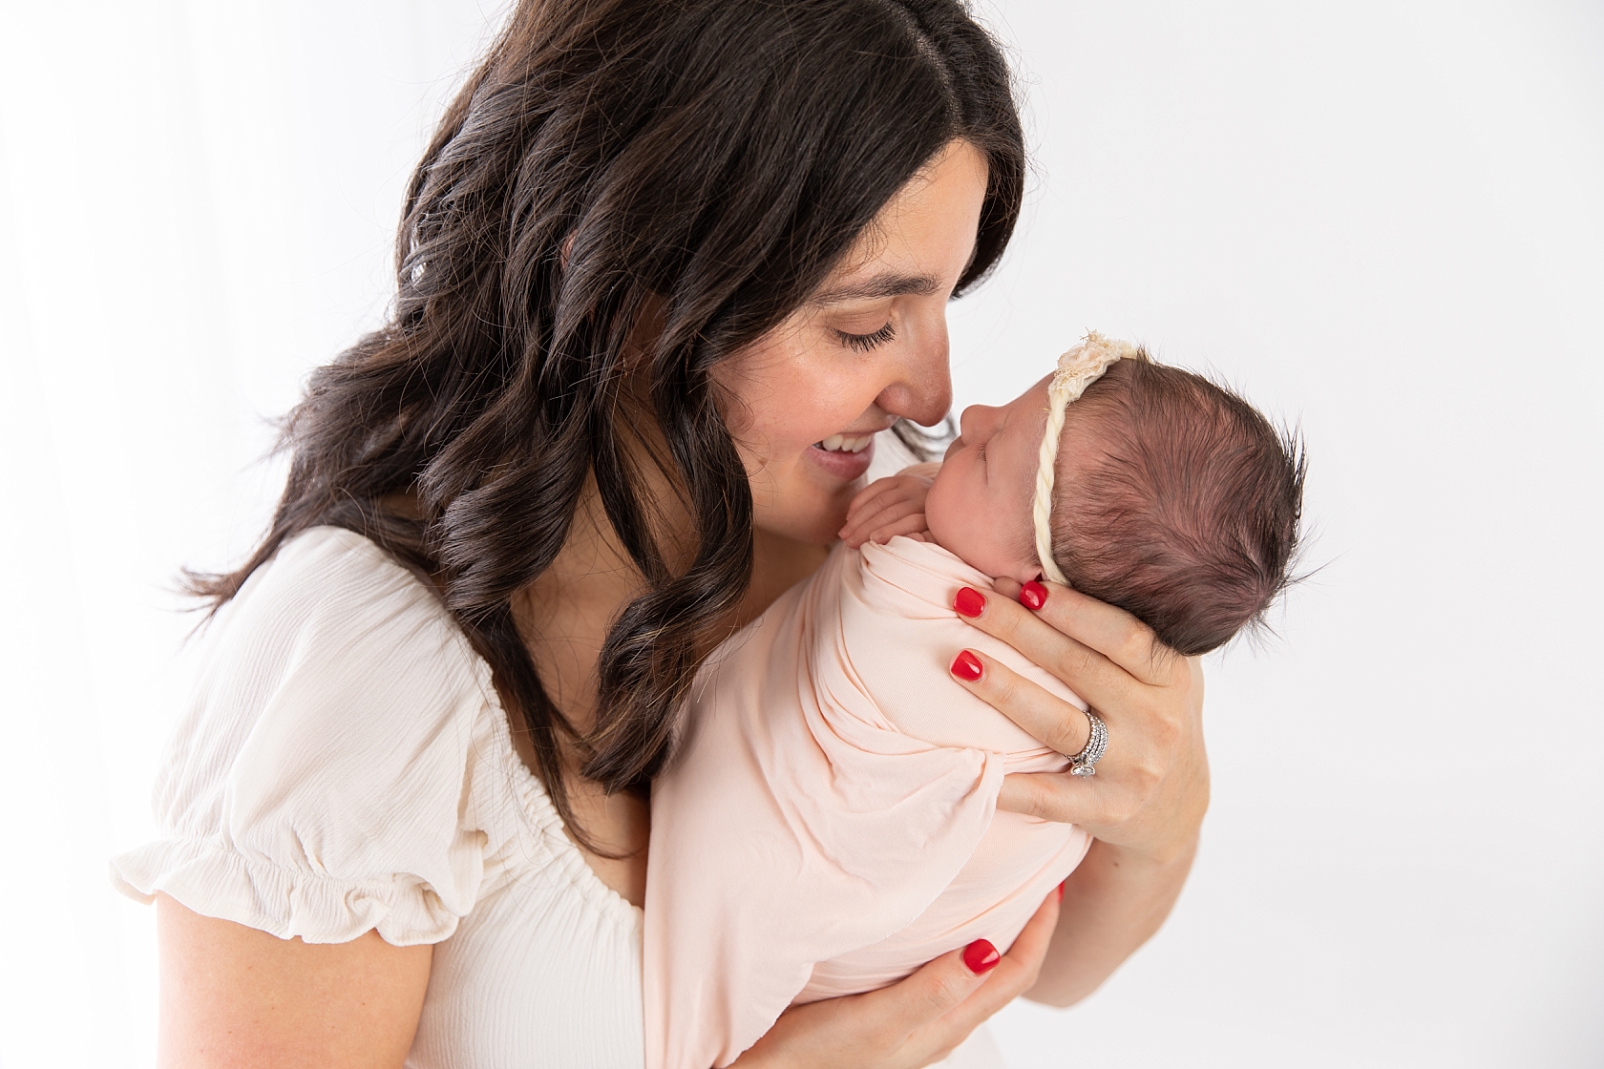 Mom smiling closely at baby girl for newborn photos with Baltimore Newborn Photographer